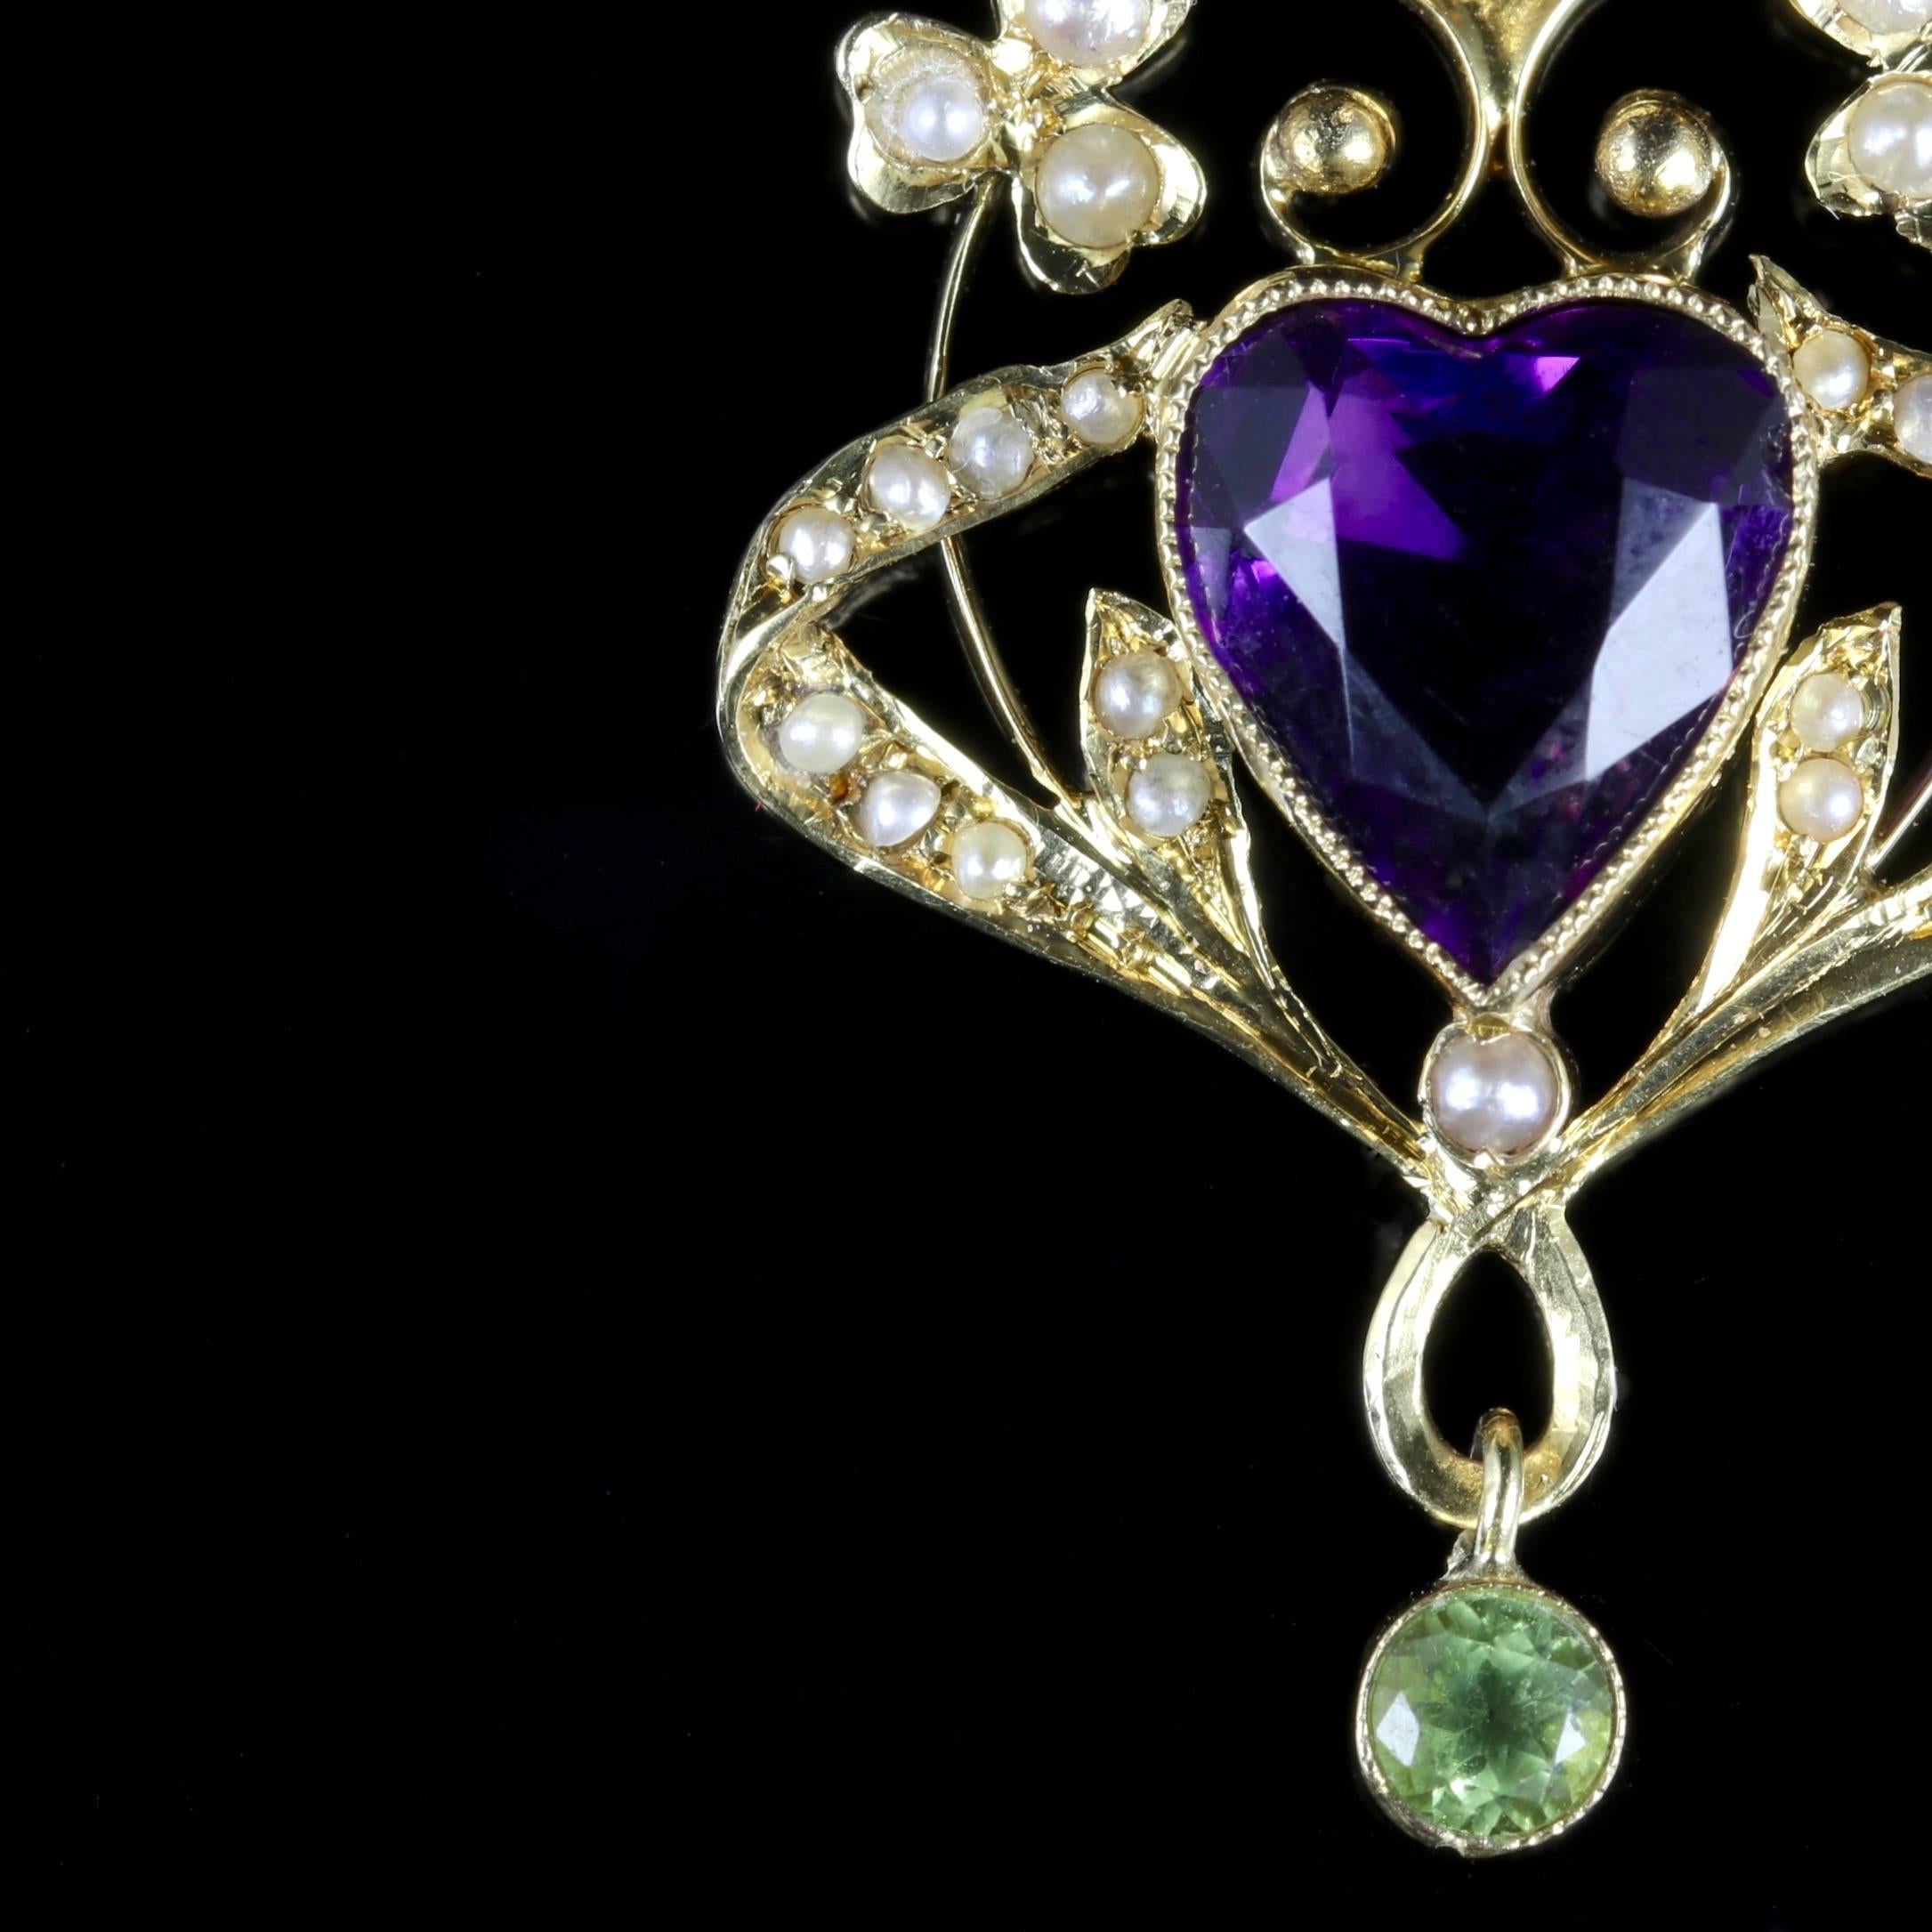 This elegant Victorian heart pendant was made representing the Suffragette movement, Circa 1900.

Suffragettes liked to be depicted as feminine, their jewellery popularly consisted of Violet, Green and White colours which were chosen to counter the